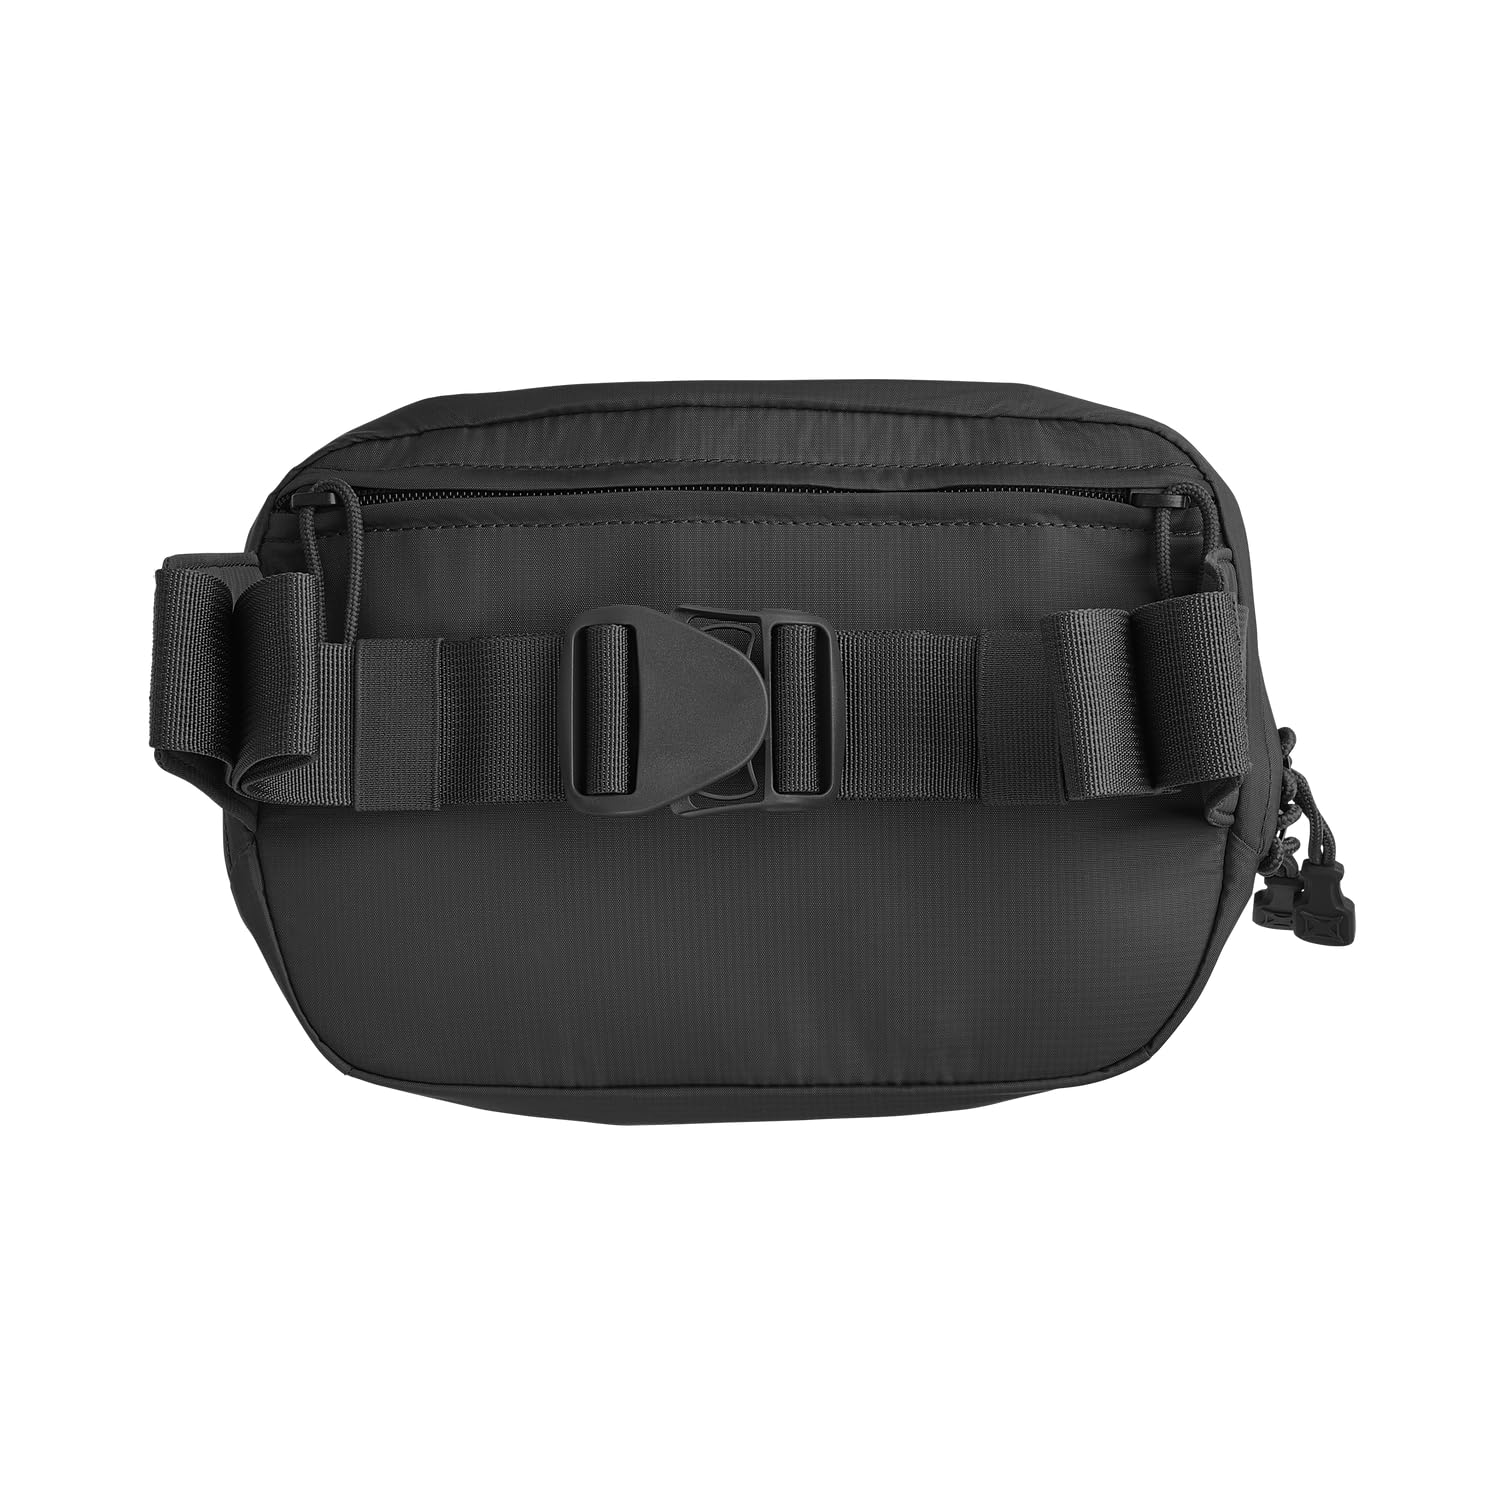 Vertx Men's Long Walks Mp 2l Tactical Waist Fanny Pack Concealed Carry Gear Bag for Travel, CCW, EDC Work